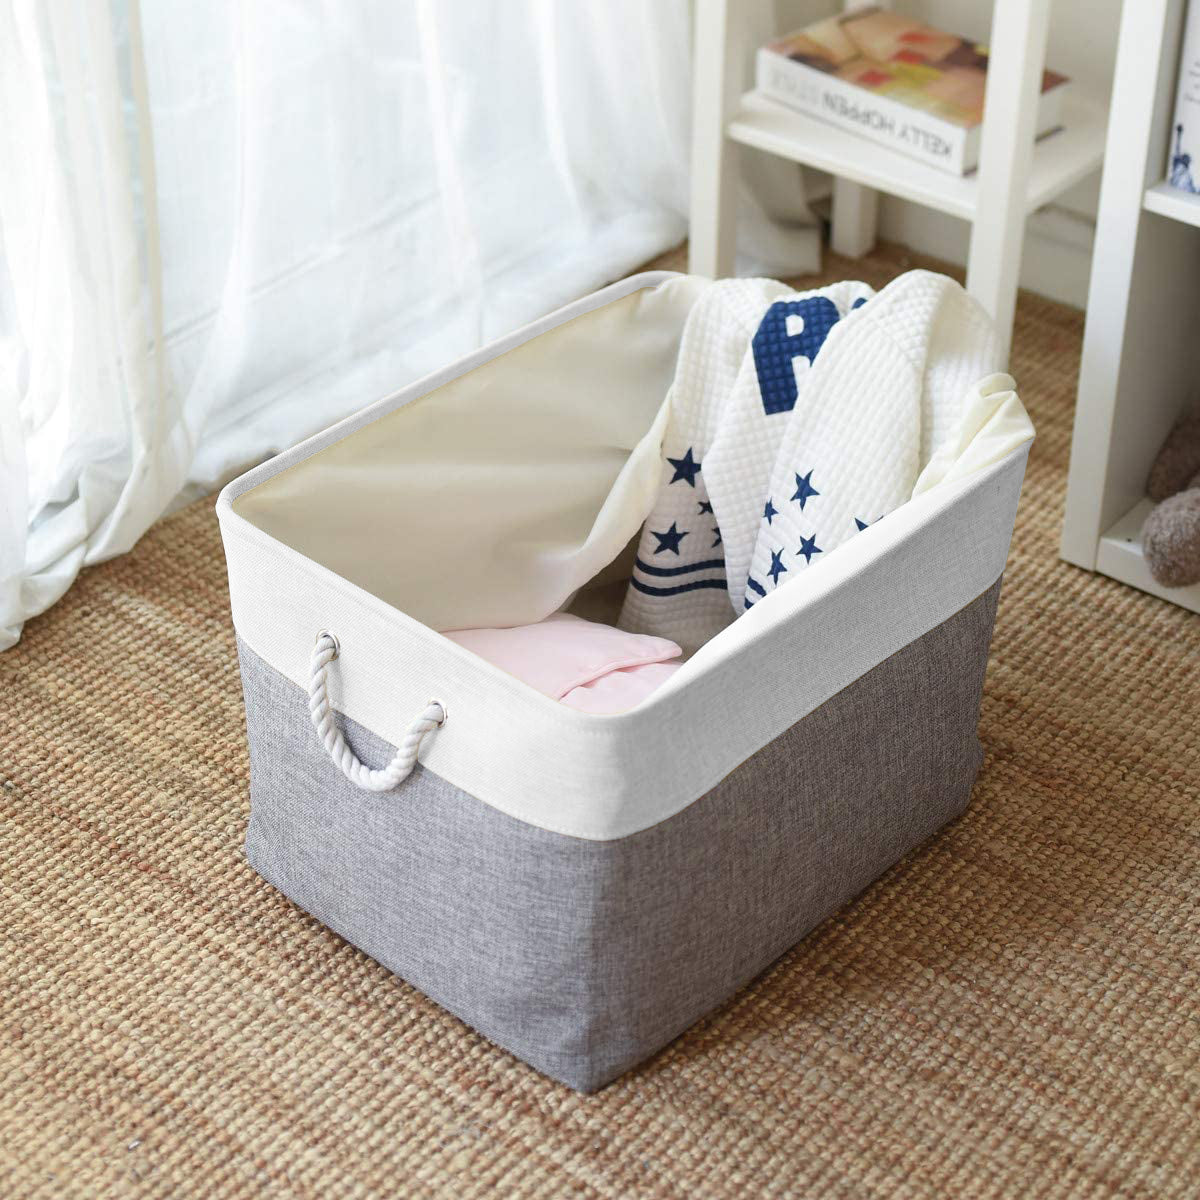 Mangata Storage Box set of 3, Canvas Fabric Storage Baskets with Handles for Cupboards, Wardrobe, Shelves, Bathroom, Clothes, Toys, Towel